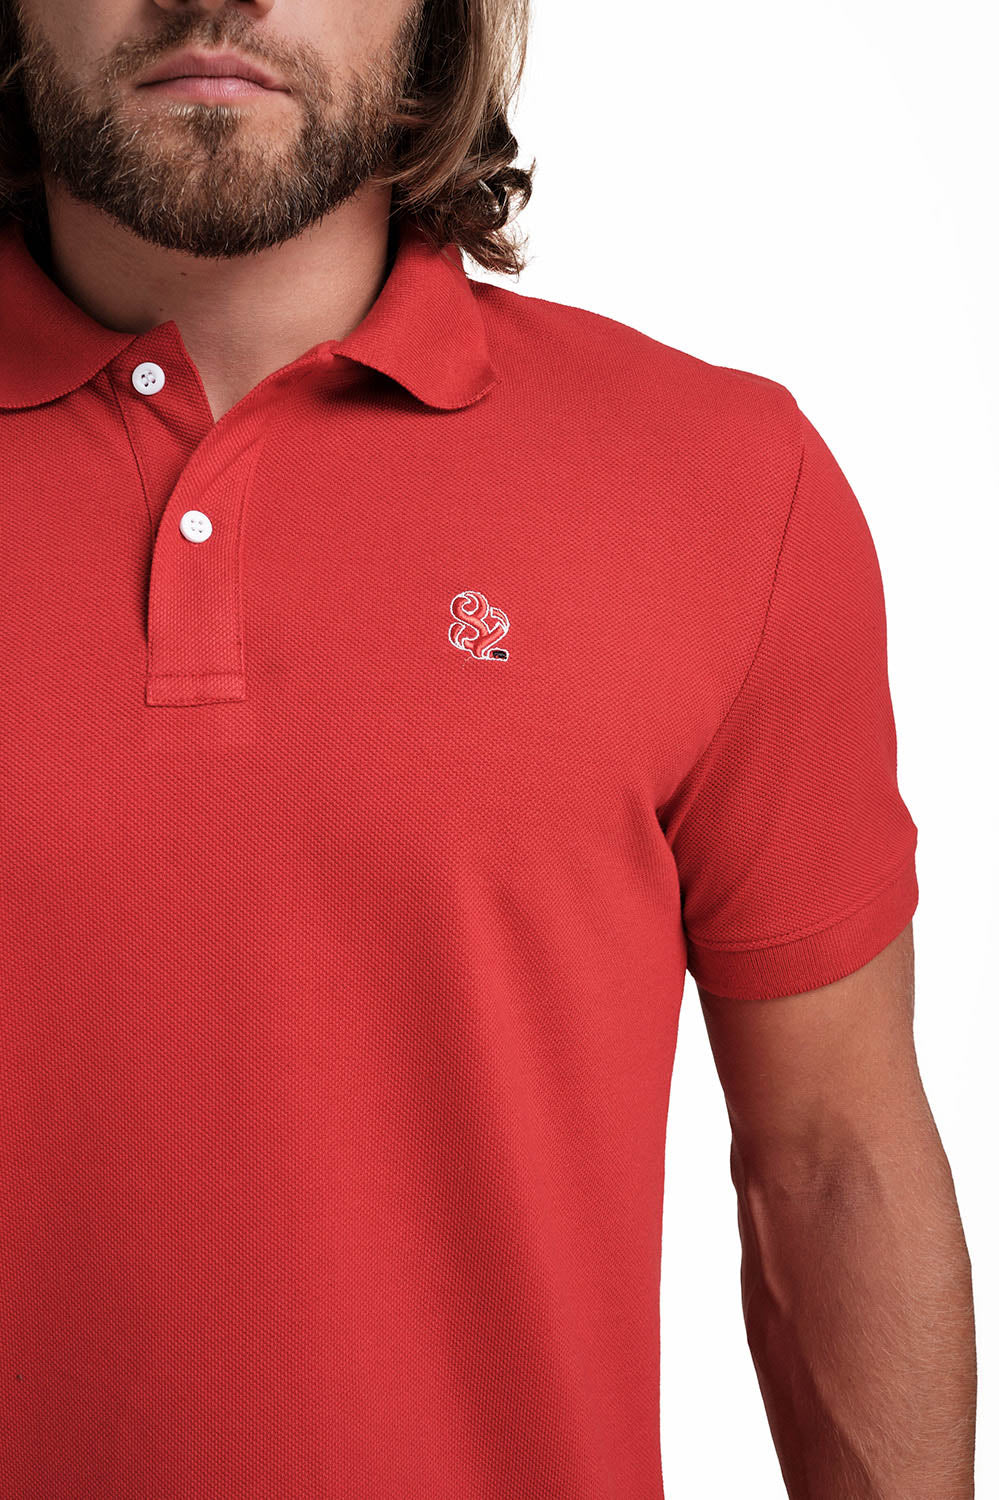 Polo RED T-shirts with Front Embroidery, Solid pique fabric